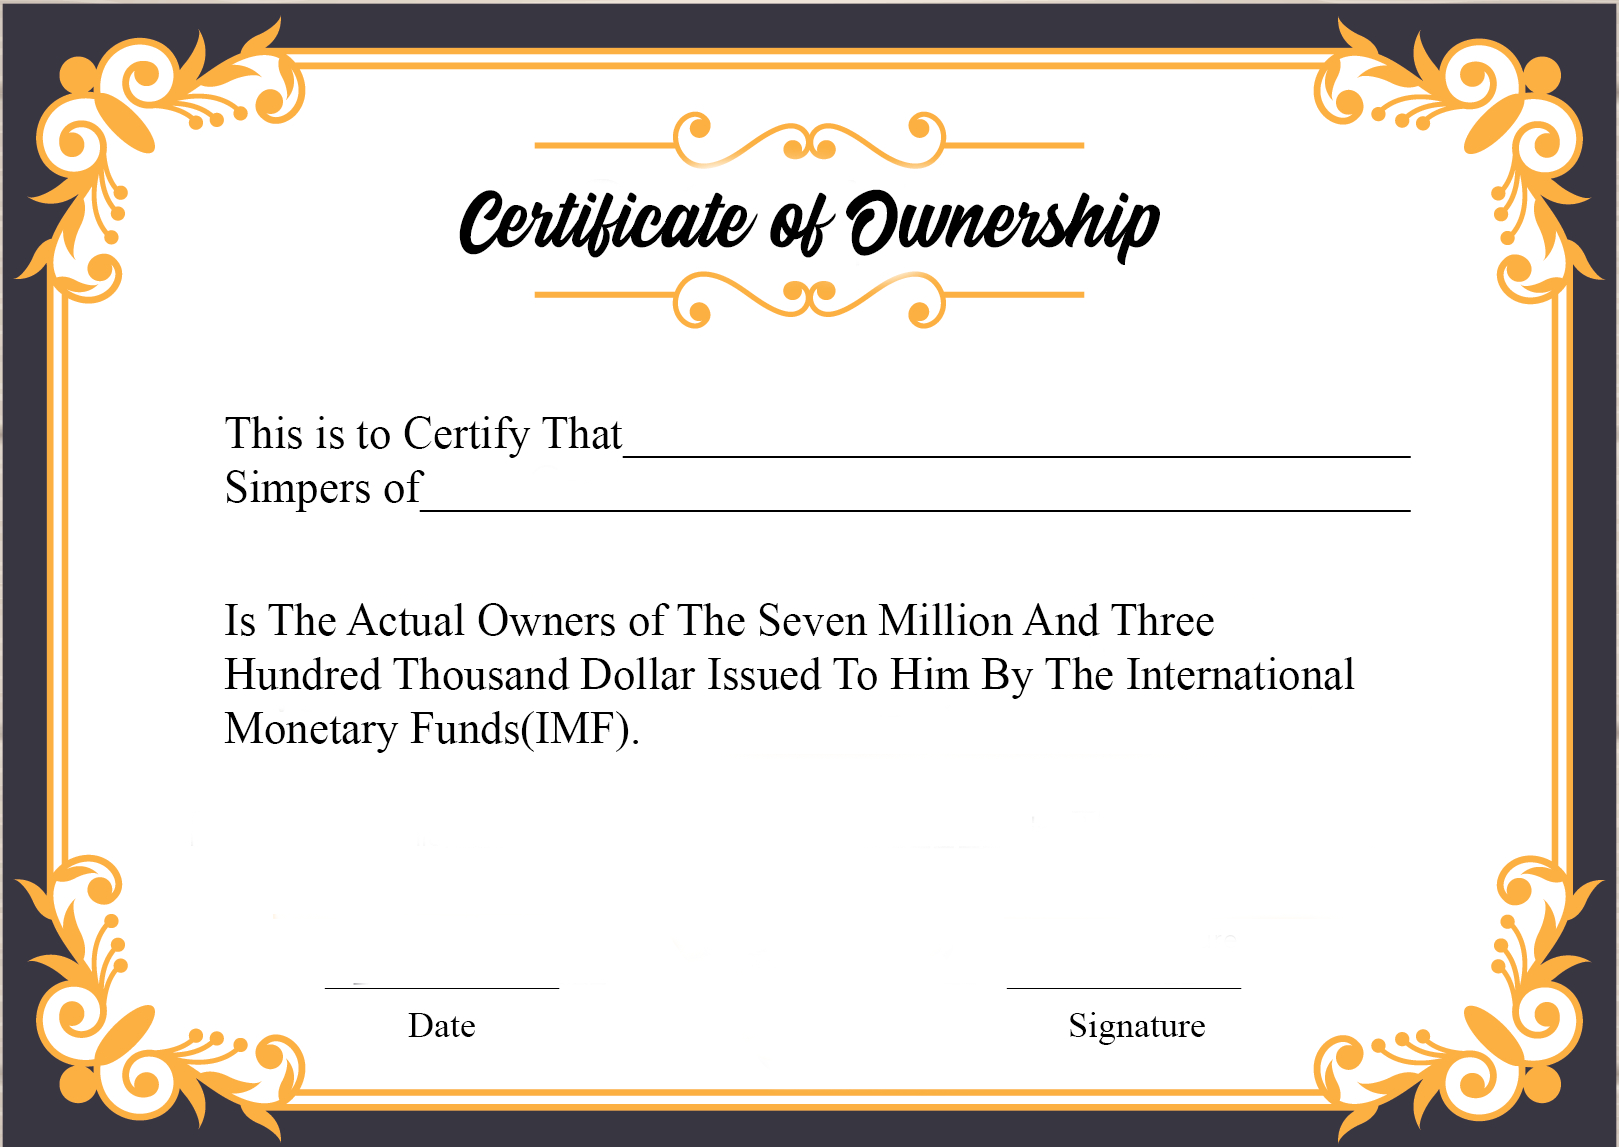 Free Sample Certificate Of Ownership Templates | Certificate Throughout Certificate Of Ownership Template